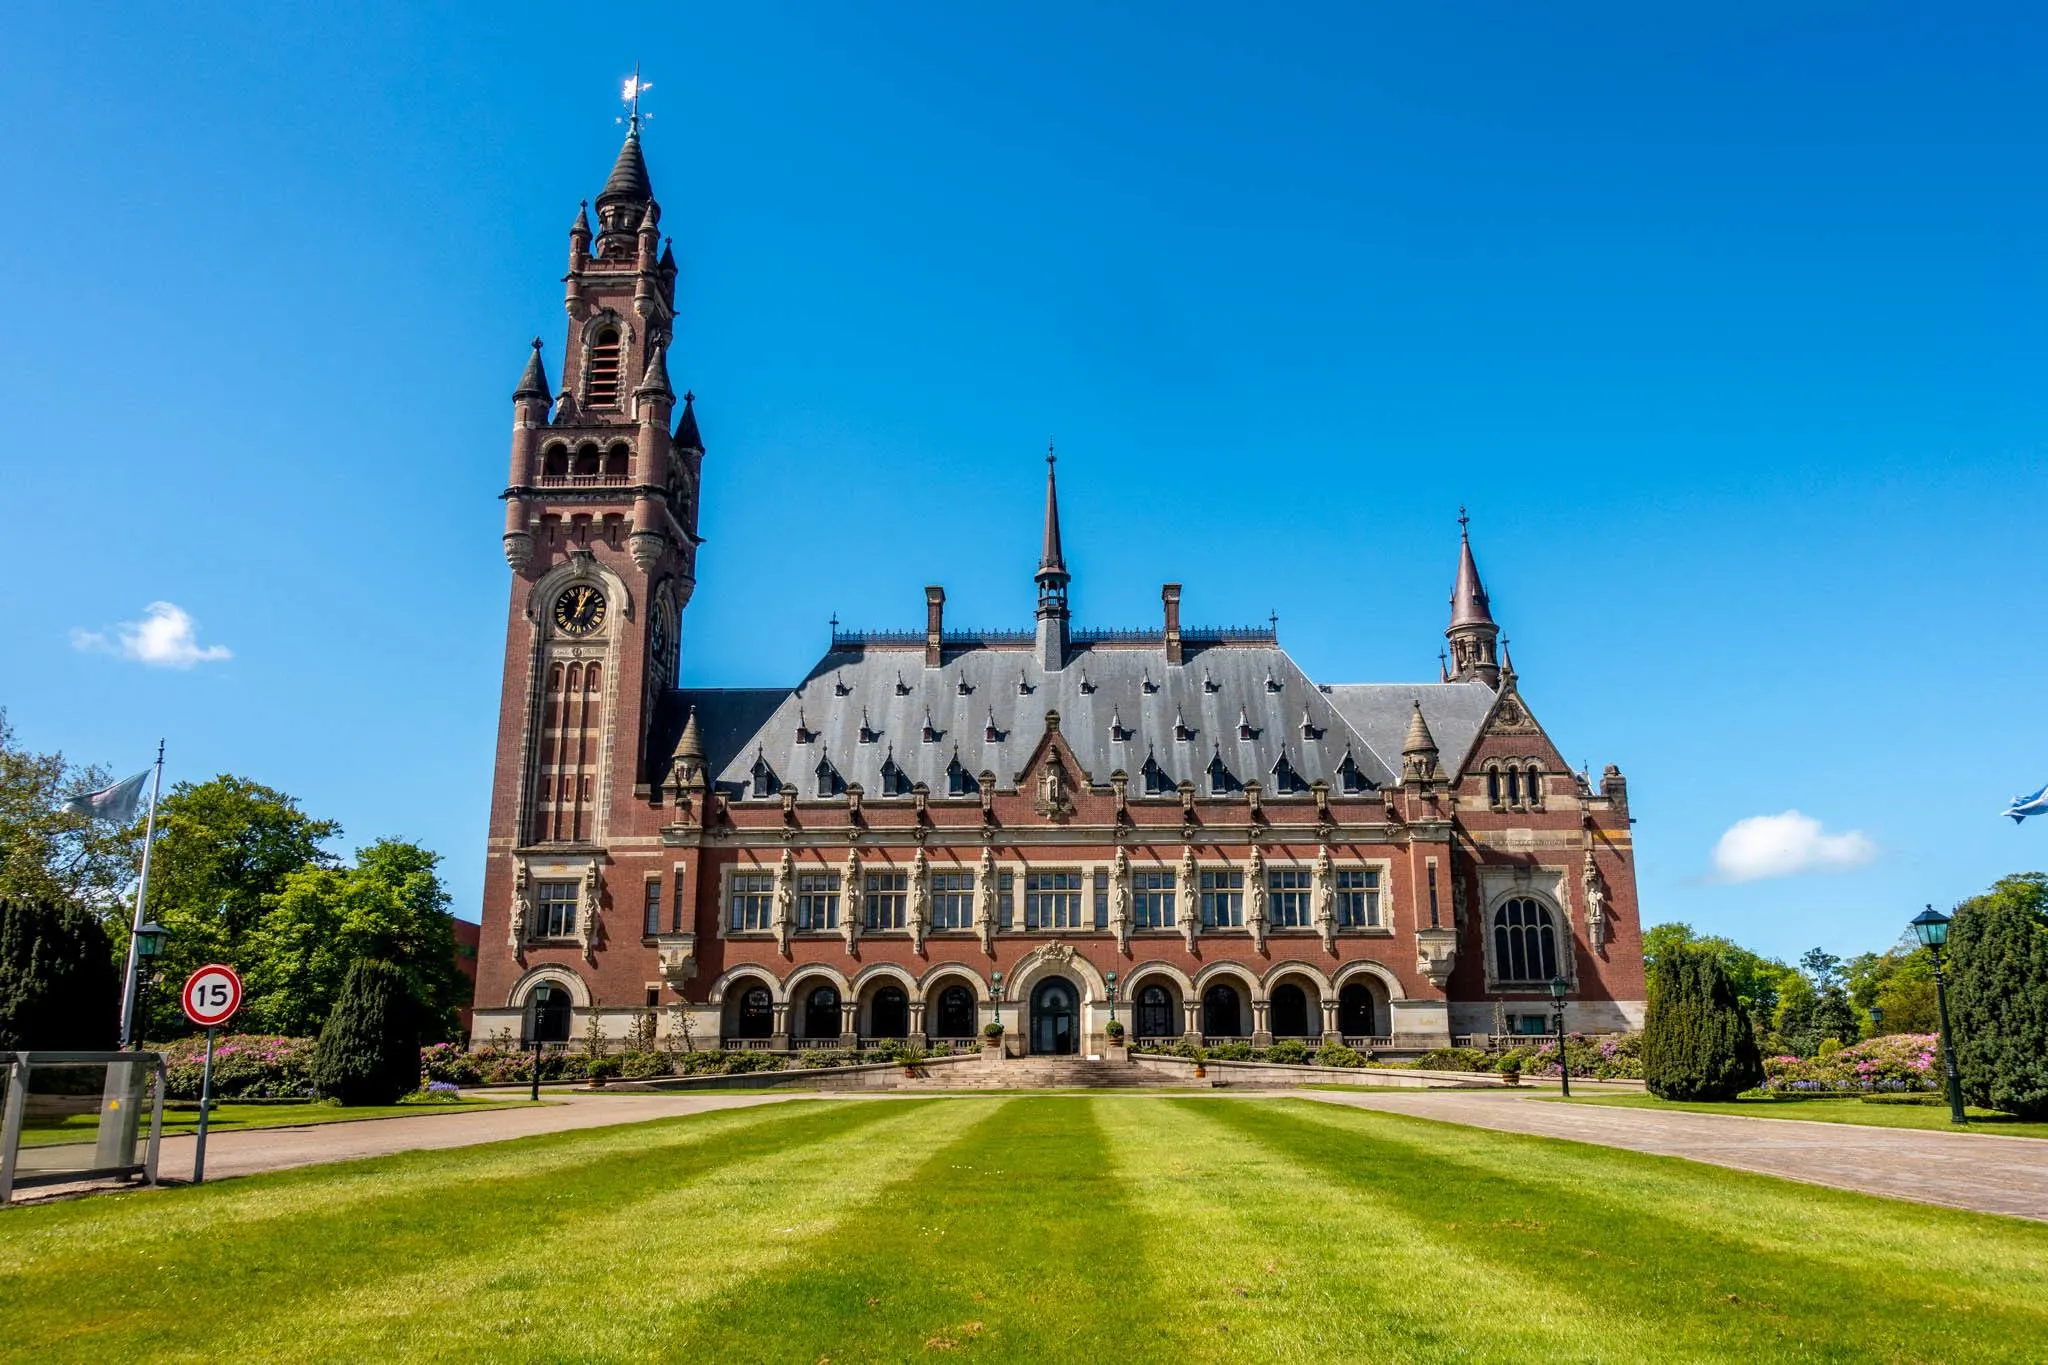 Large brick building with a clock tower, the Peace Palace in The Hague